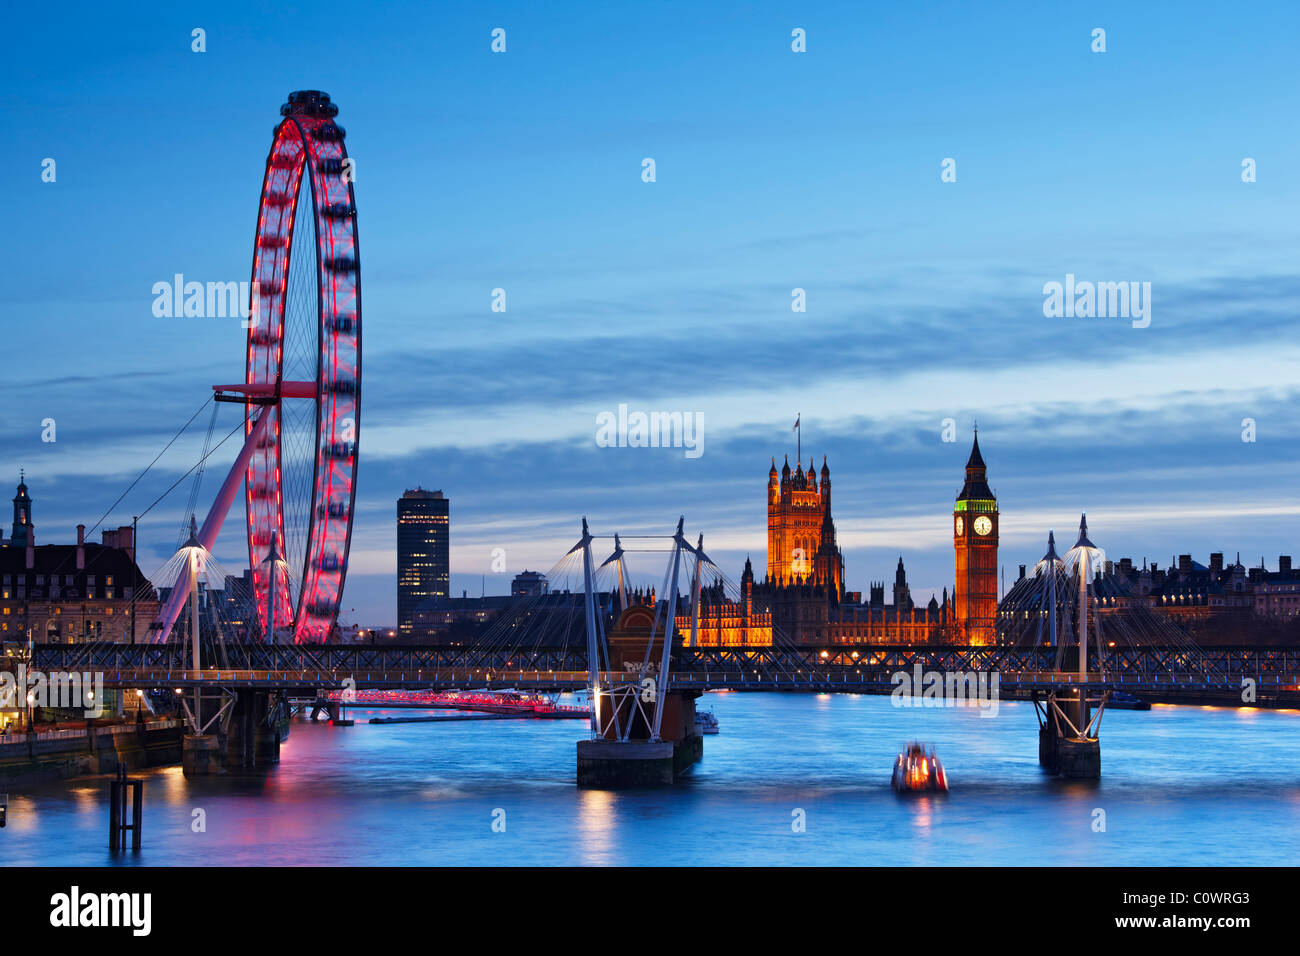 London skyline - views overlooking the River Thames toward The London Eye, the Houses Of Parliament and Jubilee Bridge Stock Photo